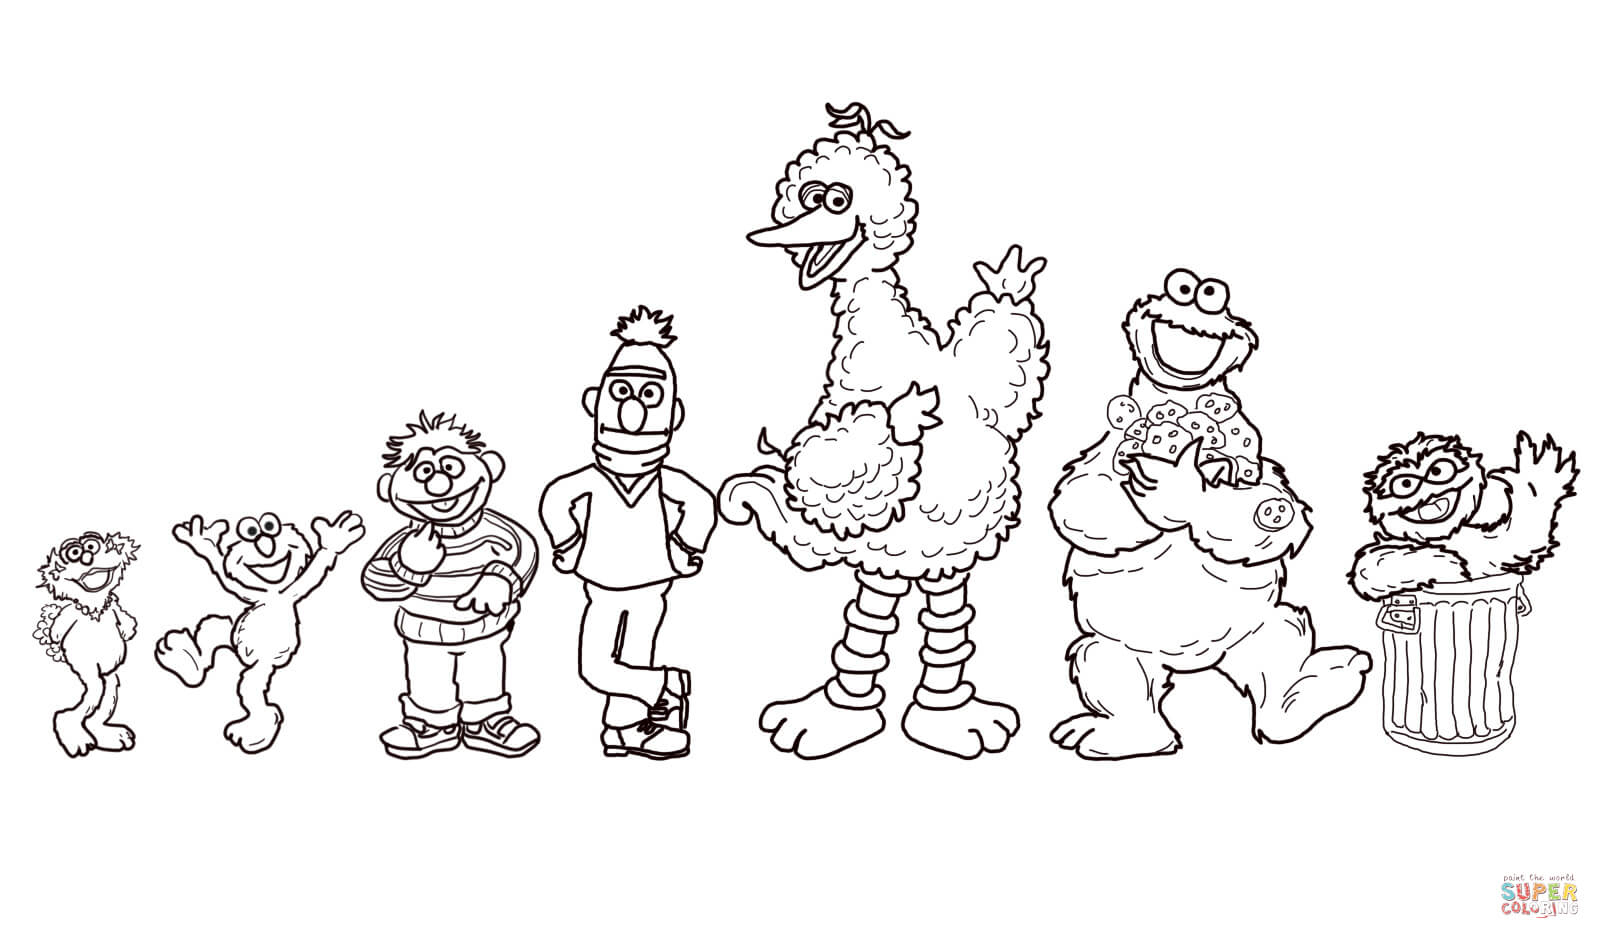 Sesame Street Sign Coloring Page Sesame Street Characters Coloring Page Free Printable Coloring Pages